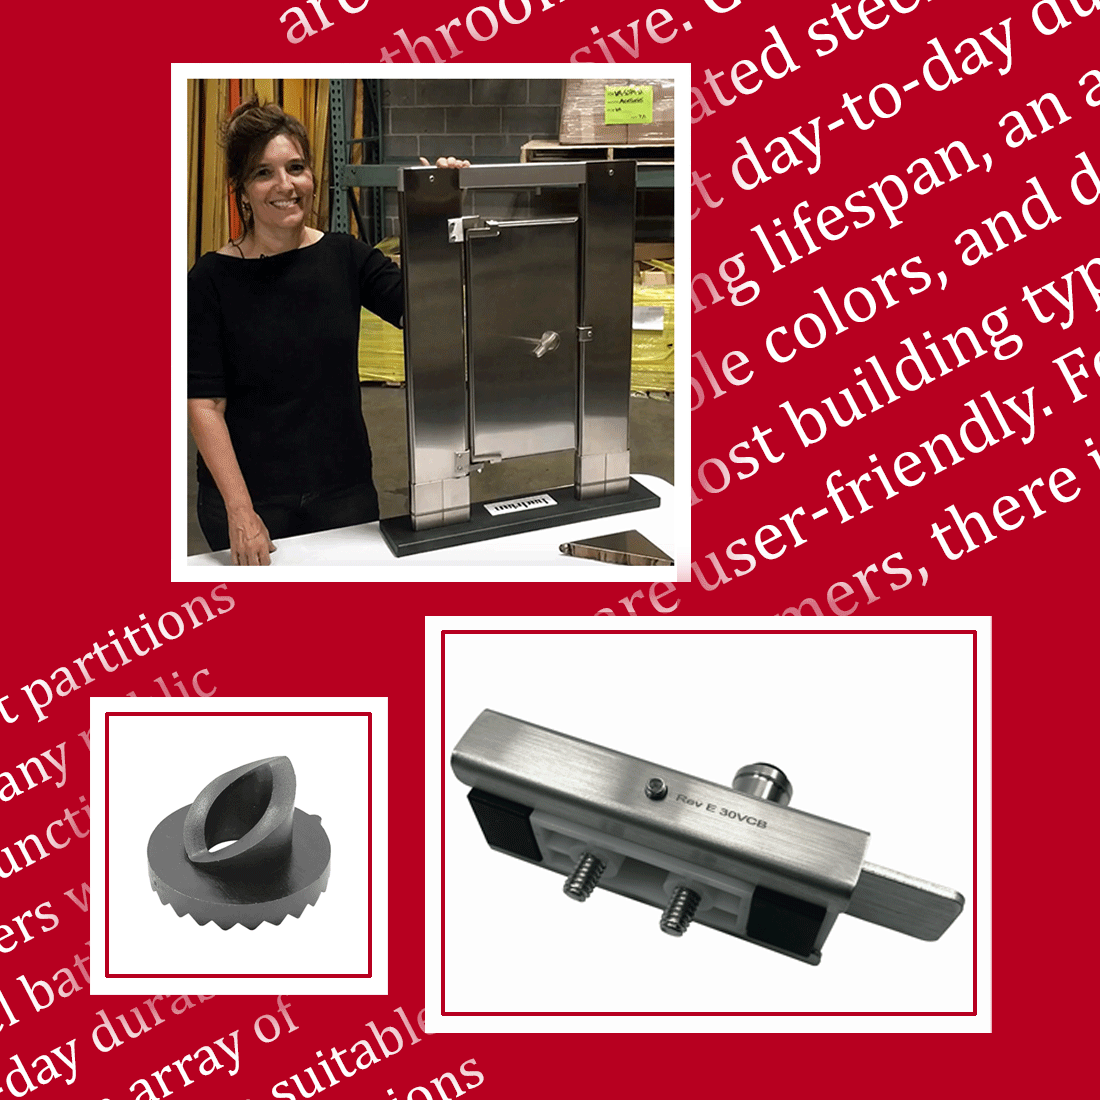 Composite image showing a friendly employee and detailed product photos, with product description text in the background.